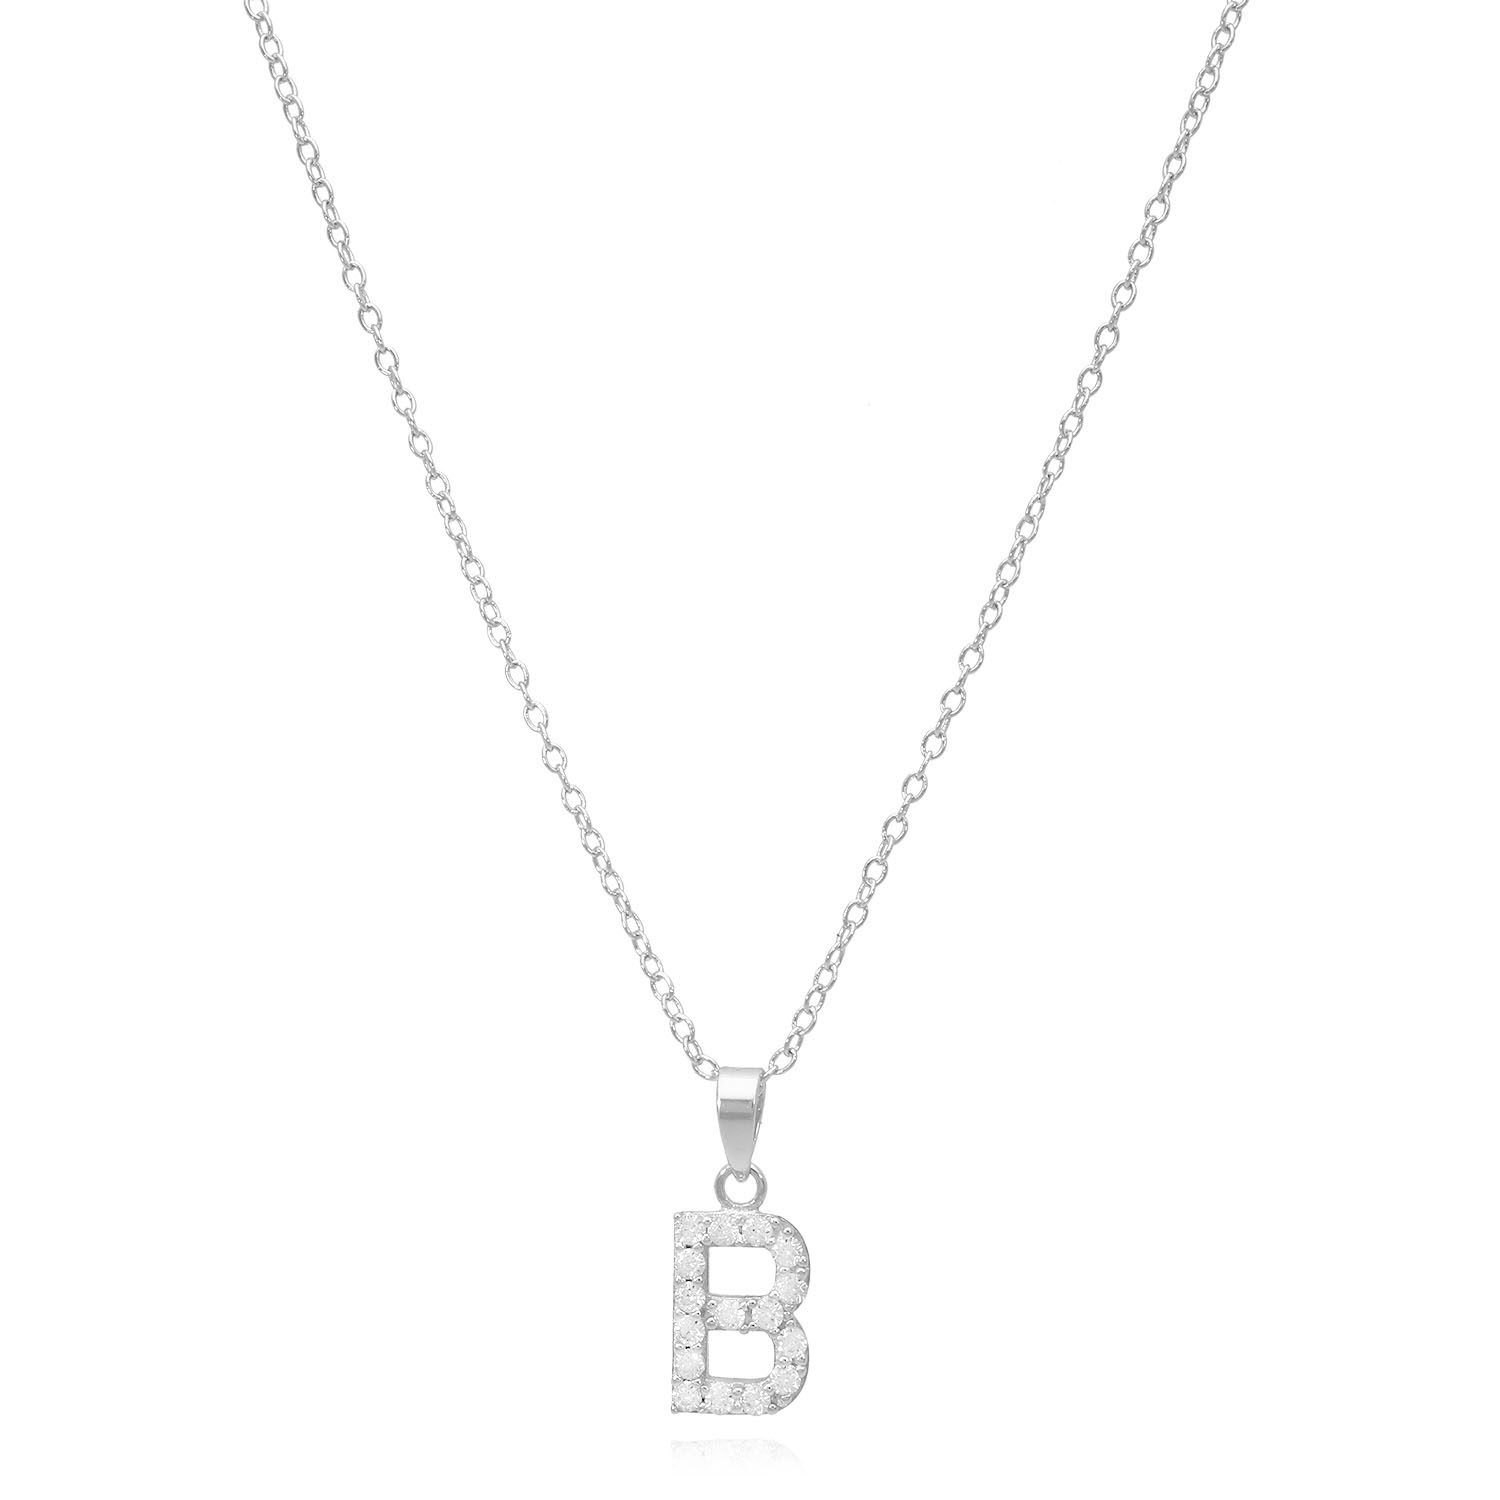 Sterling Silver Simulated Diamond Initial Pendant Chain Necklace 18" - B